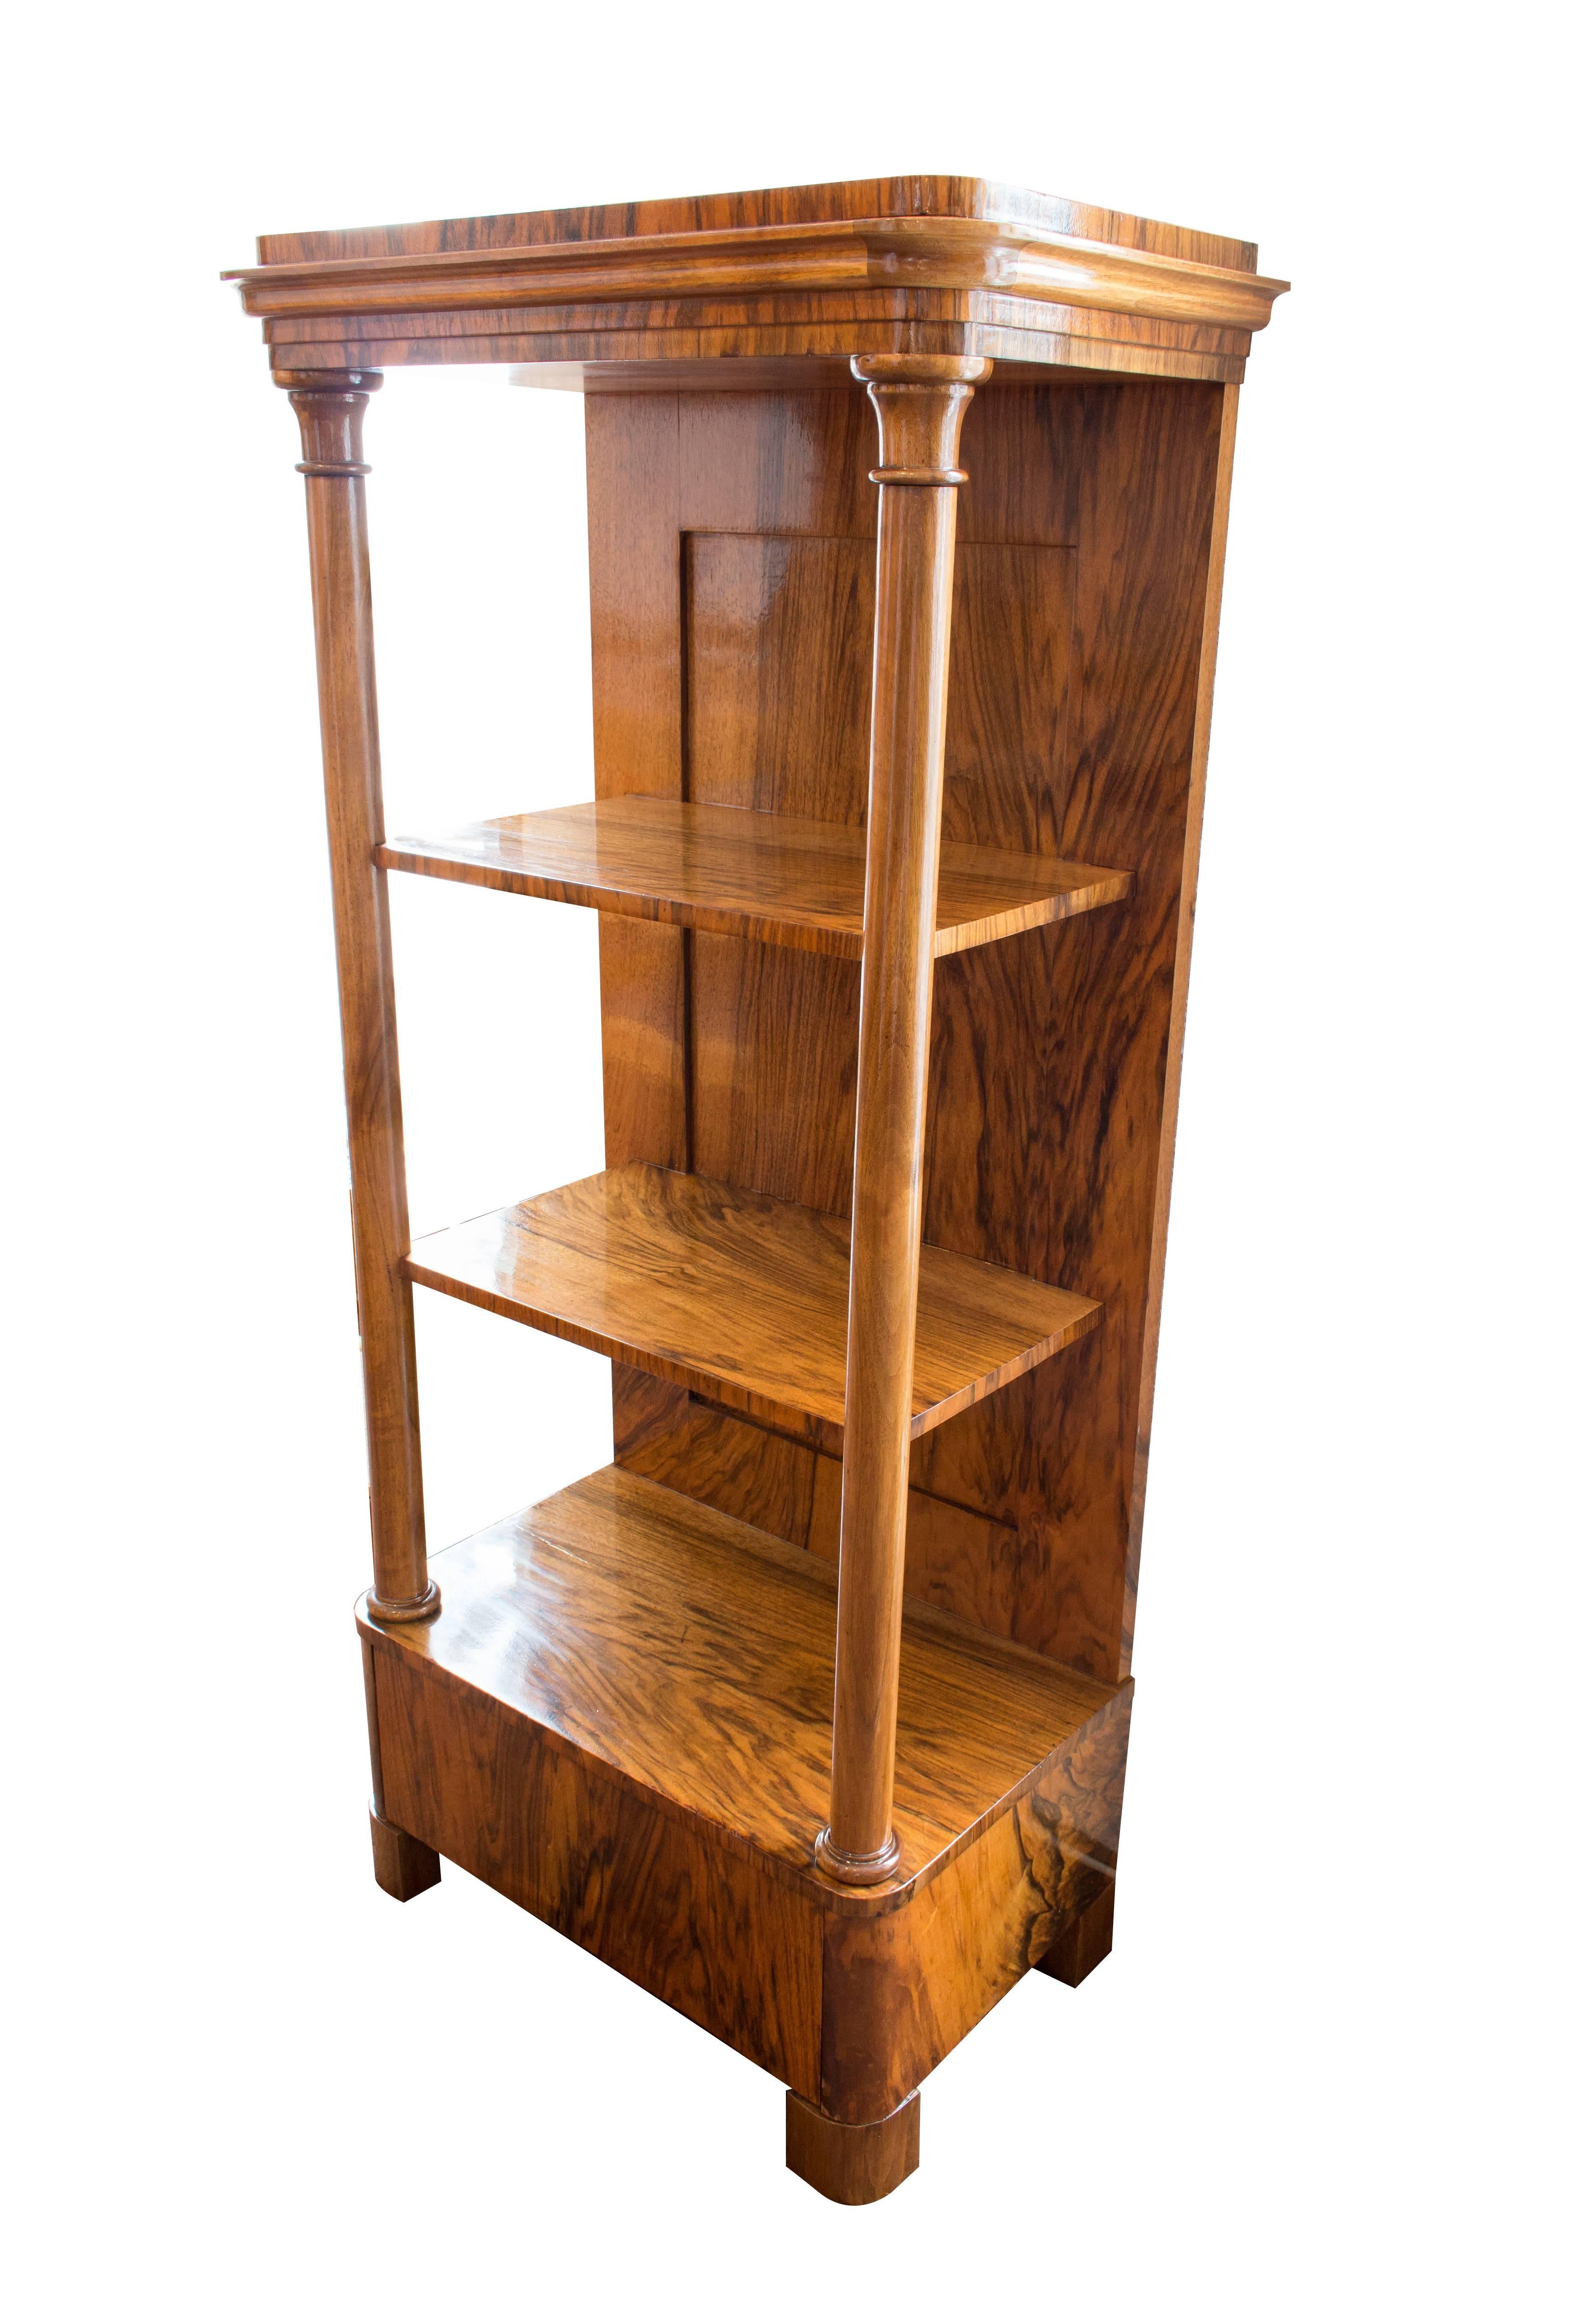 Very nice little pillar etagere from the time of Biedermeier, circa 1820. The etagere is walnut veneered on pine wood. The columns are made of solid walnut. There is a drawer in the base. In very good restored condition.